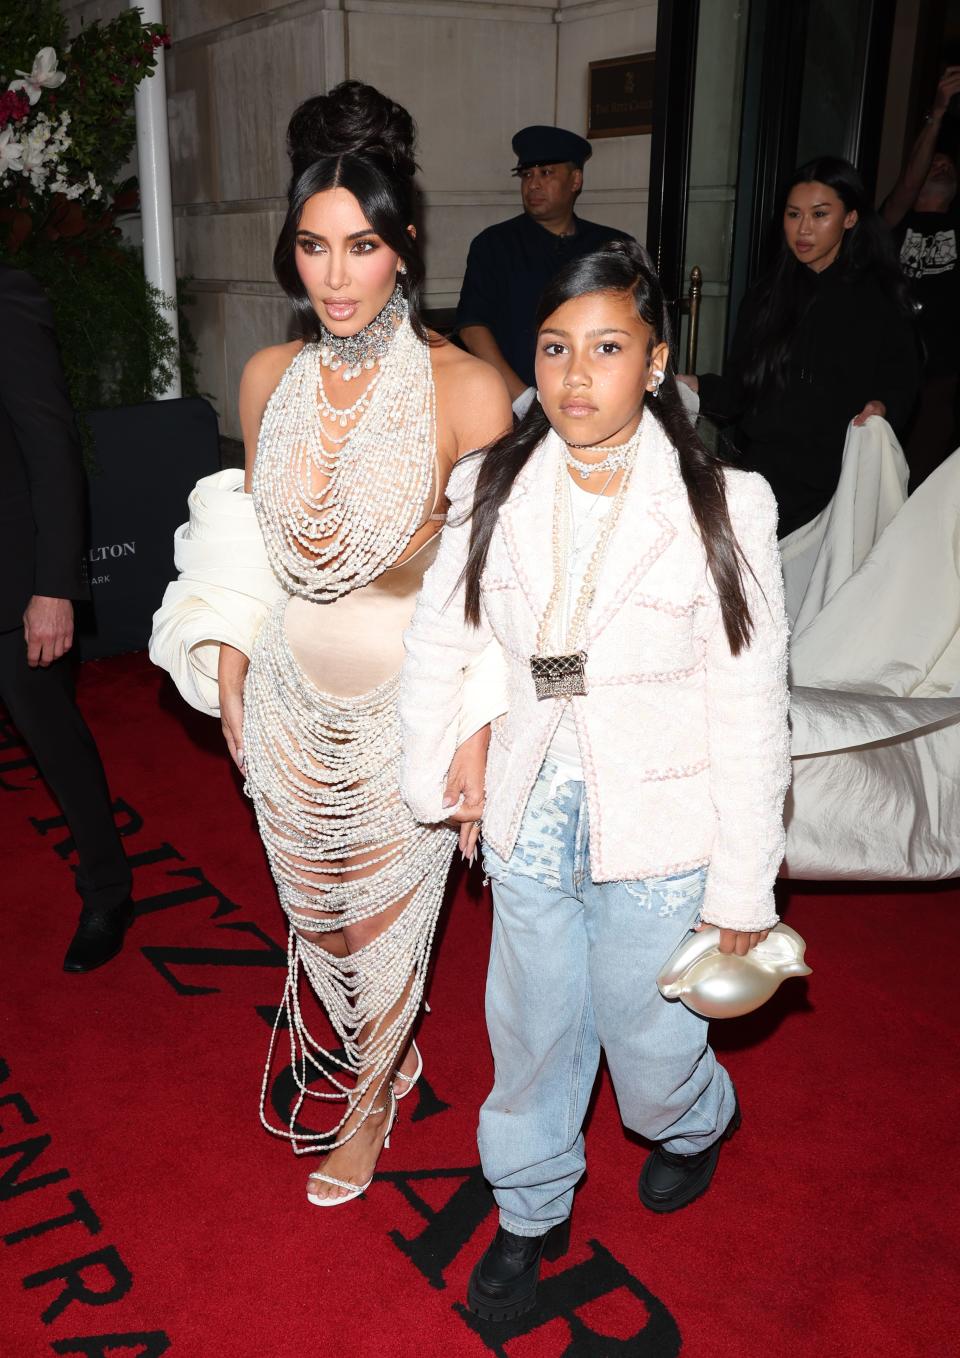 NEW YORK, NEW YORK - MAY 01: Kim Kardashian and North West are seen leaving the Ritz Hotel on May 01, 2023 in New York City. (Photo by MEGA/GC Images)